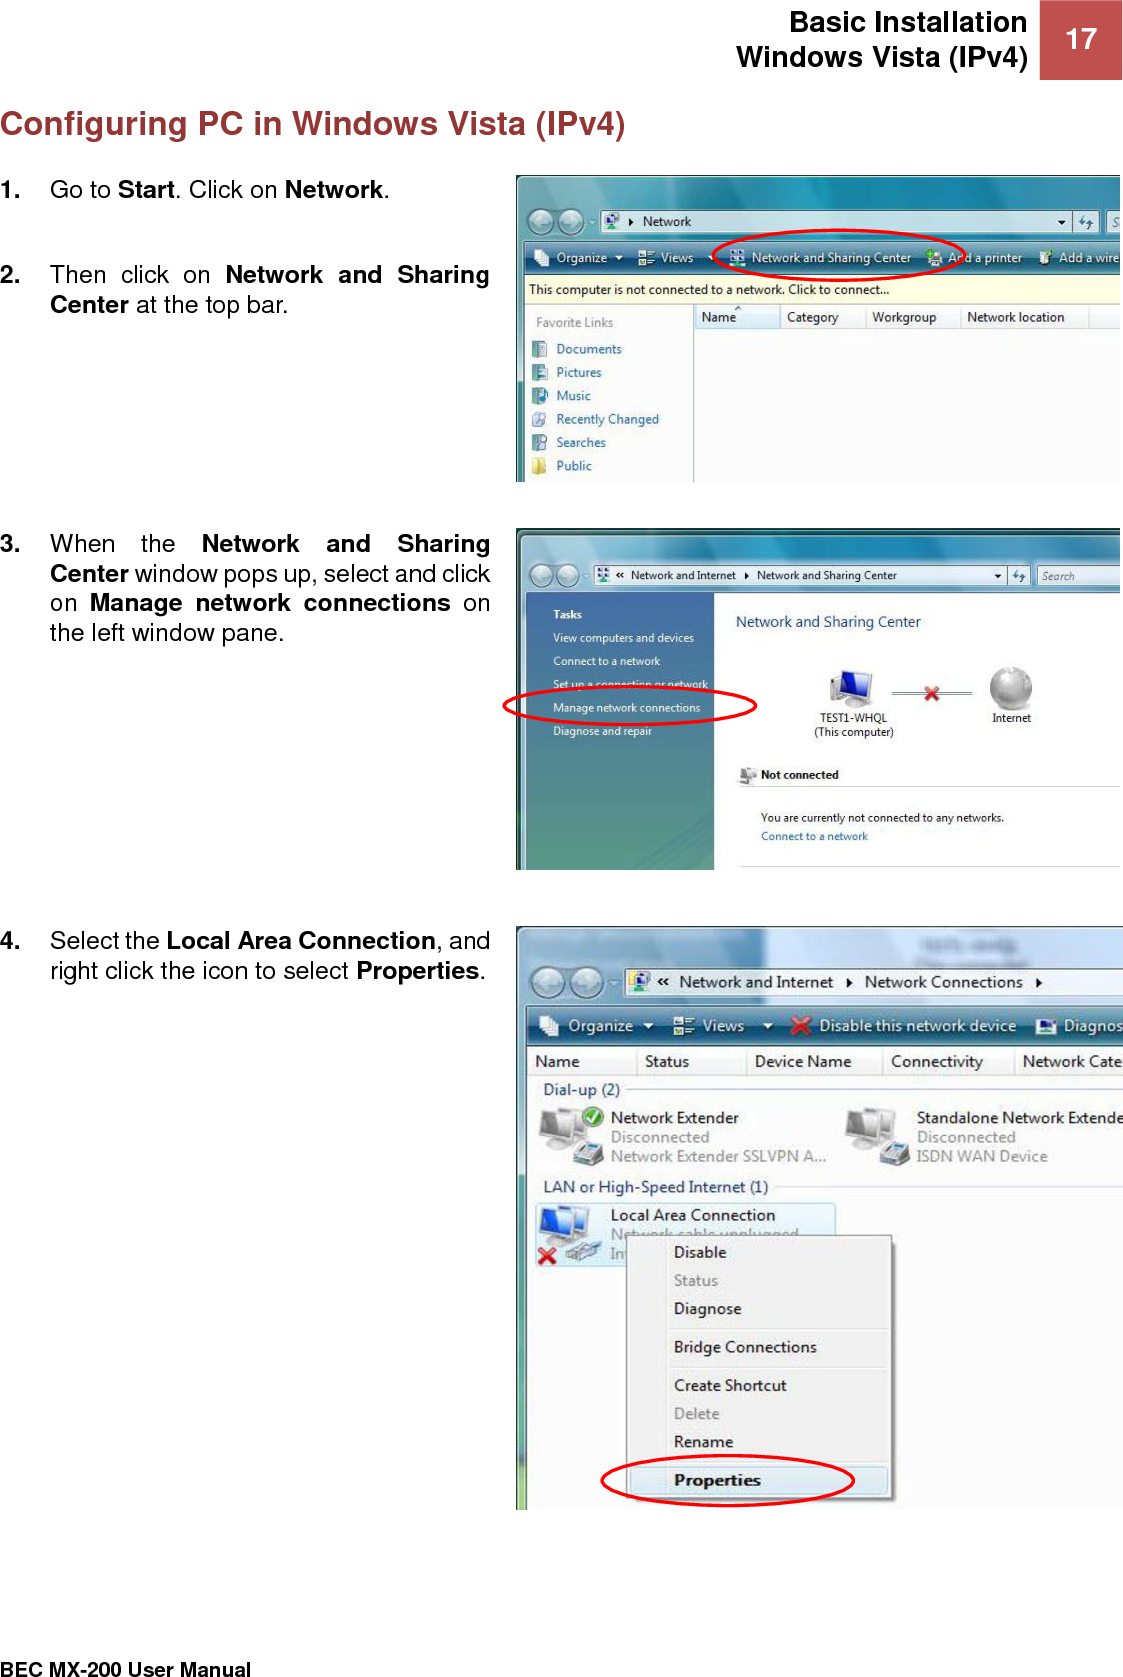 Basic Installation Windows Vista (IPv4) 17   BEC MX-200 User Manual  Configuring PC in Windows Vista (IPv4) 1. Go to Start. Click on Network.  2. Then  click  on  Network  and  Sharing Center at the top bar.  3. When  the  Network  and  Sharing Center window pops up, select and click on  Manage  network  connections on the left window pane.  4. Select the Local Area Connection, and right click the icon to select Properties.  